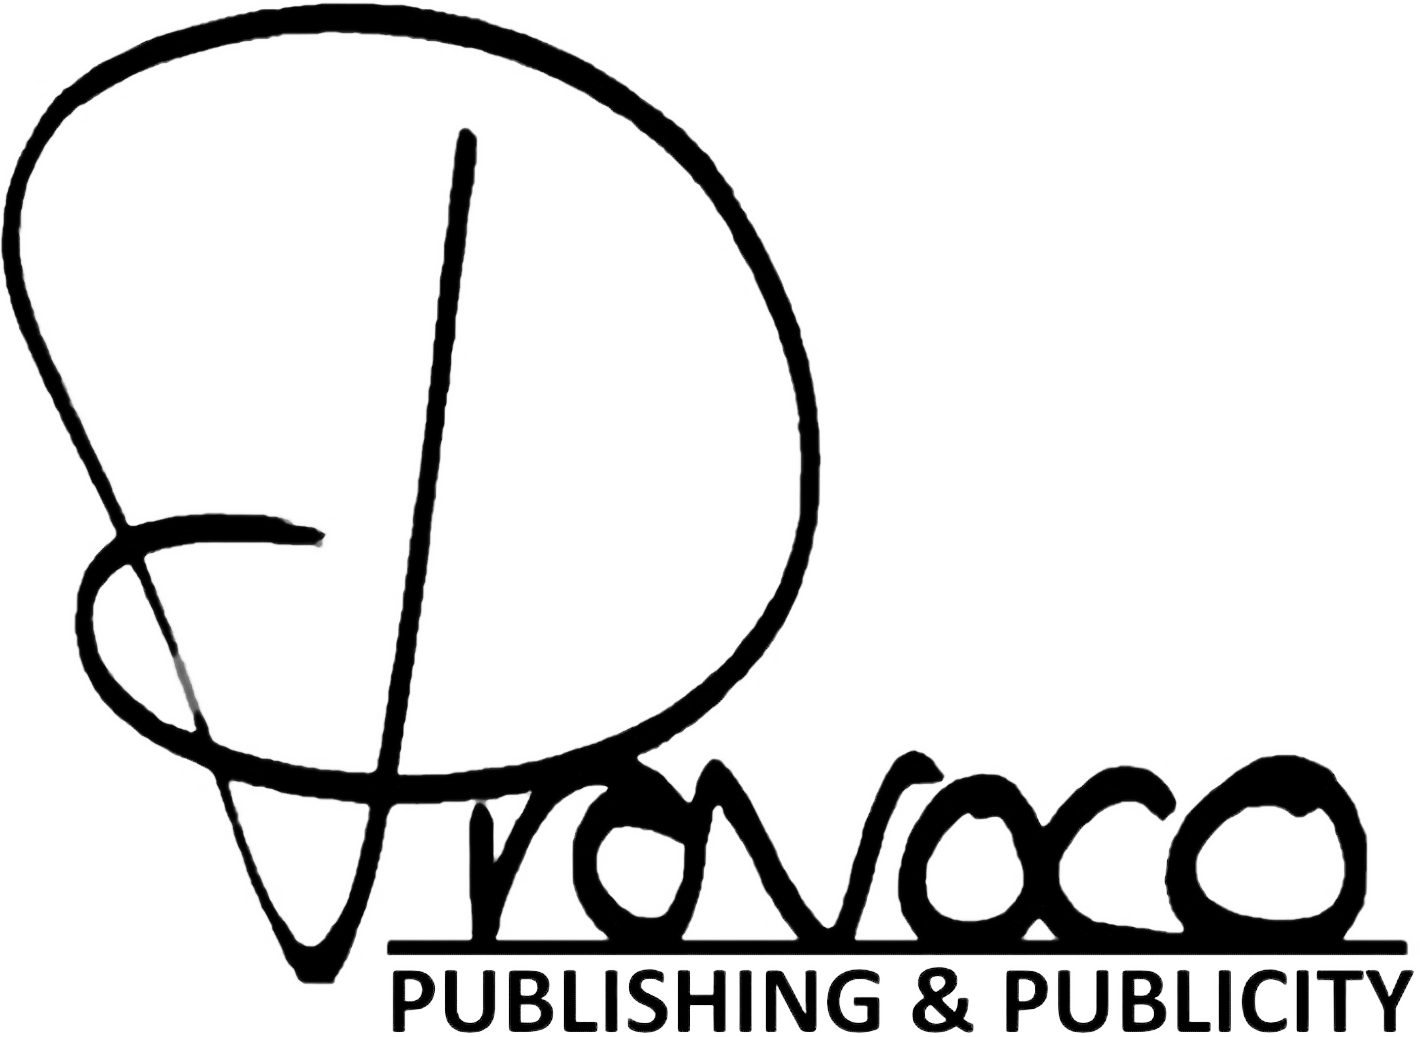 provoco publishing and publicity logo